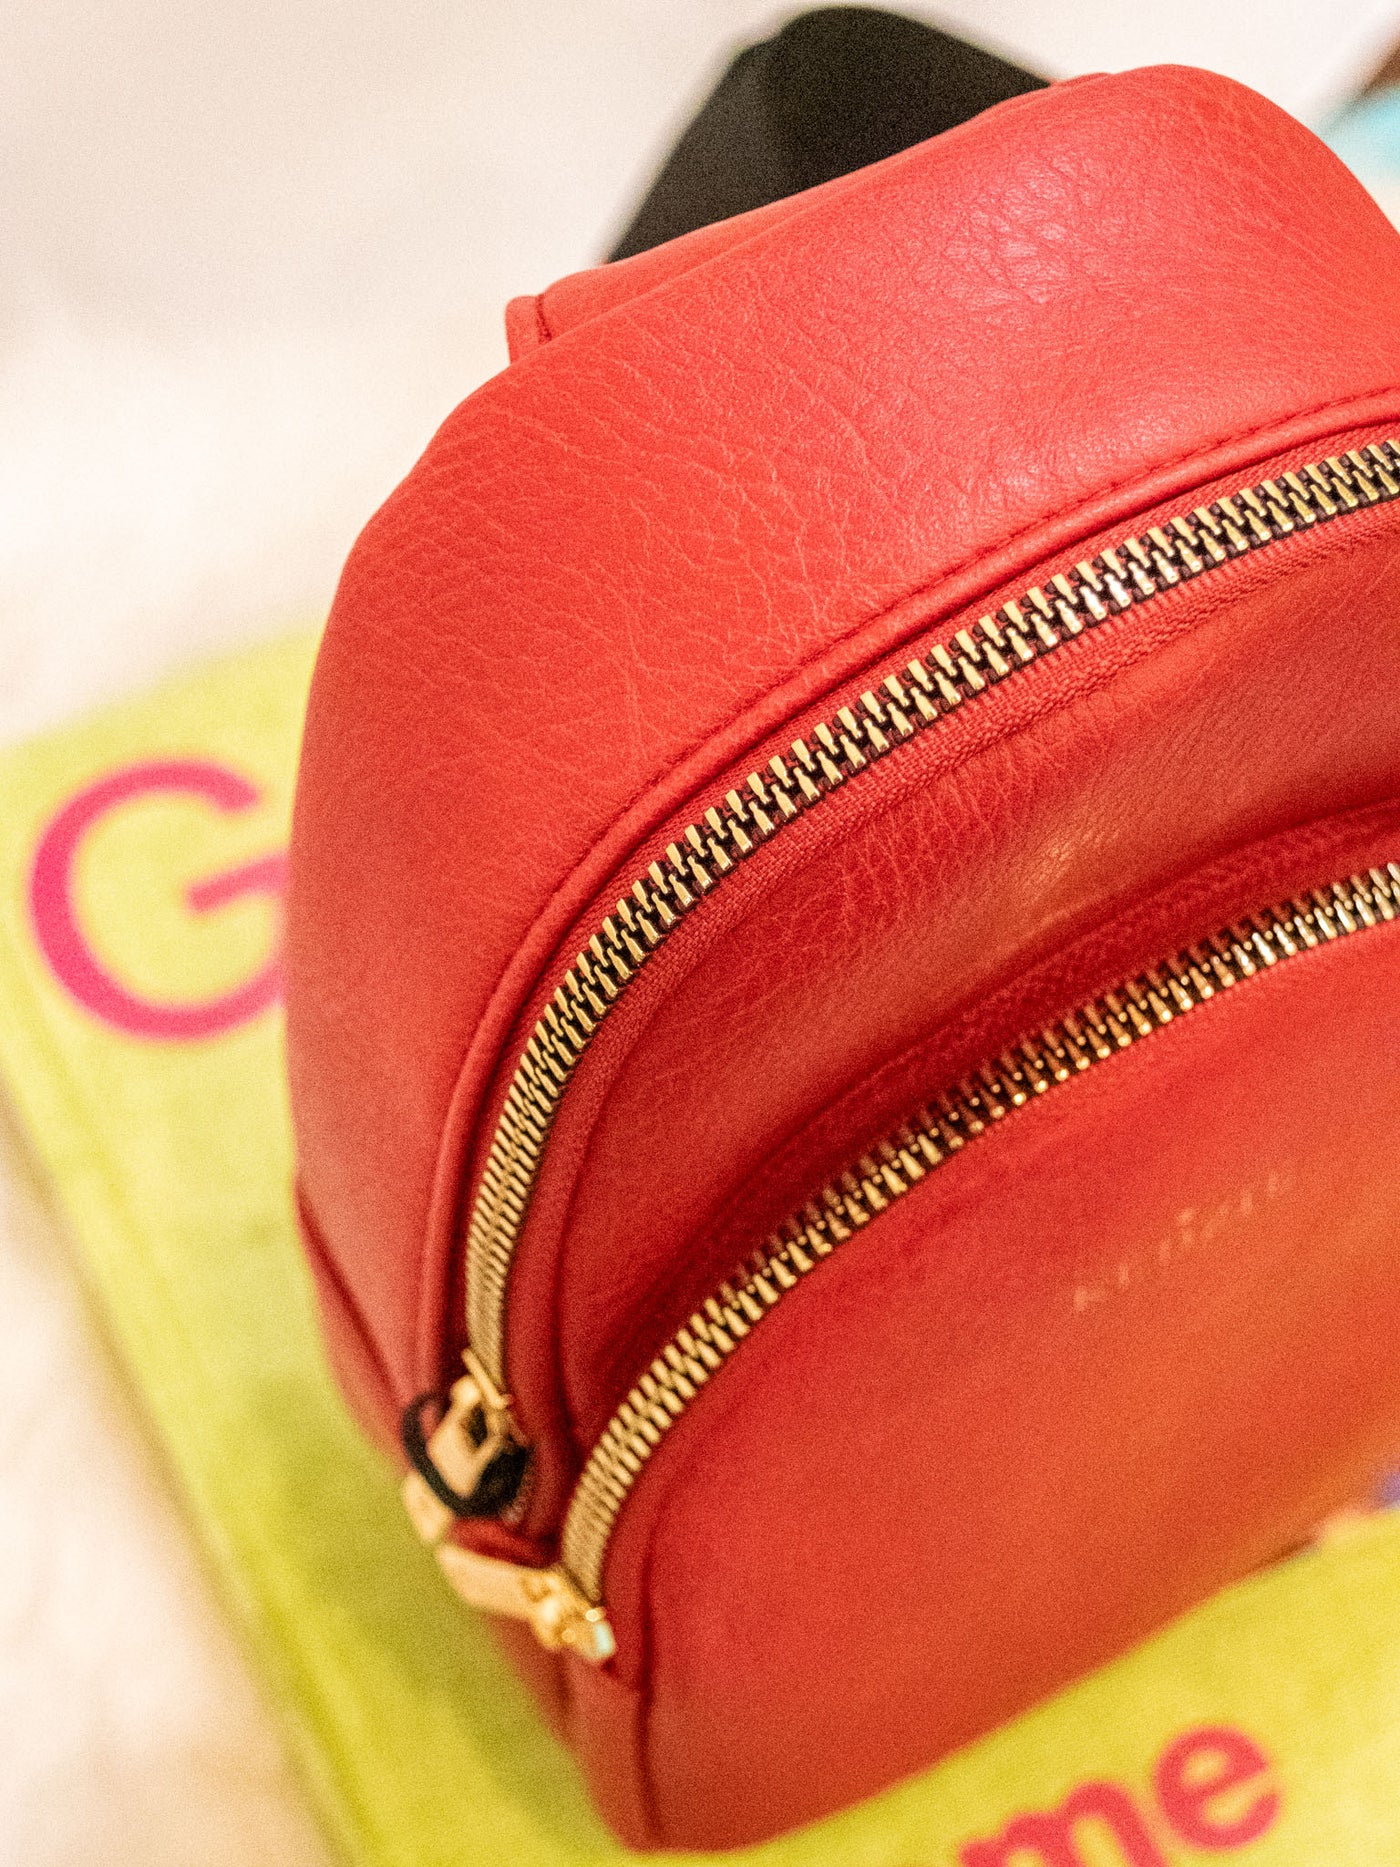 A red vegan leather sling bag with two zipper pockets and a black strap.